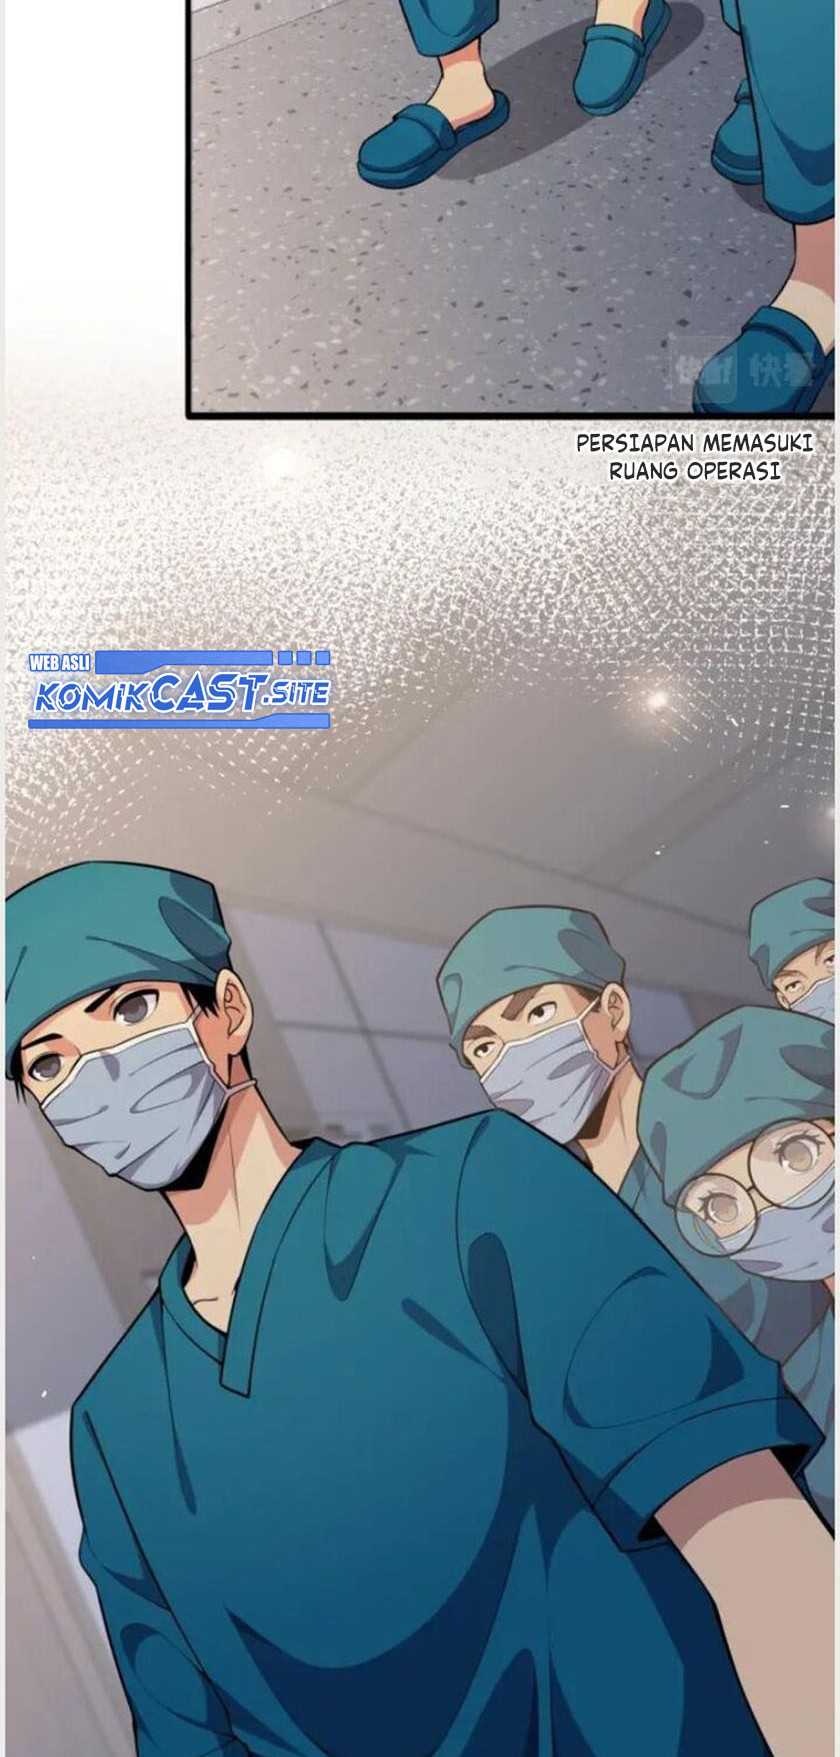 Great Doctor Ling Ran Chapter 154